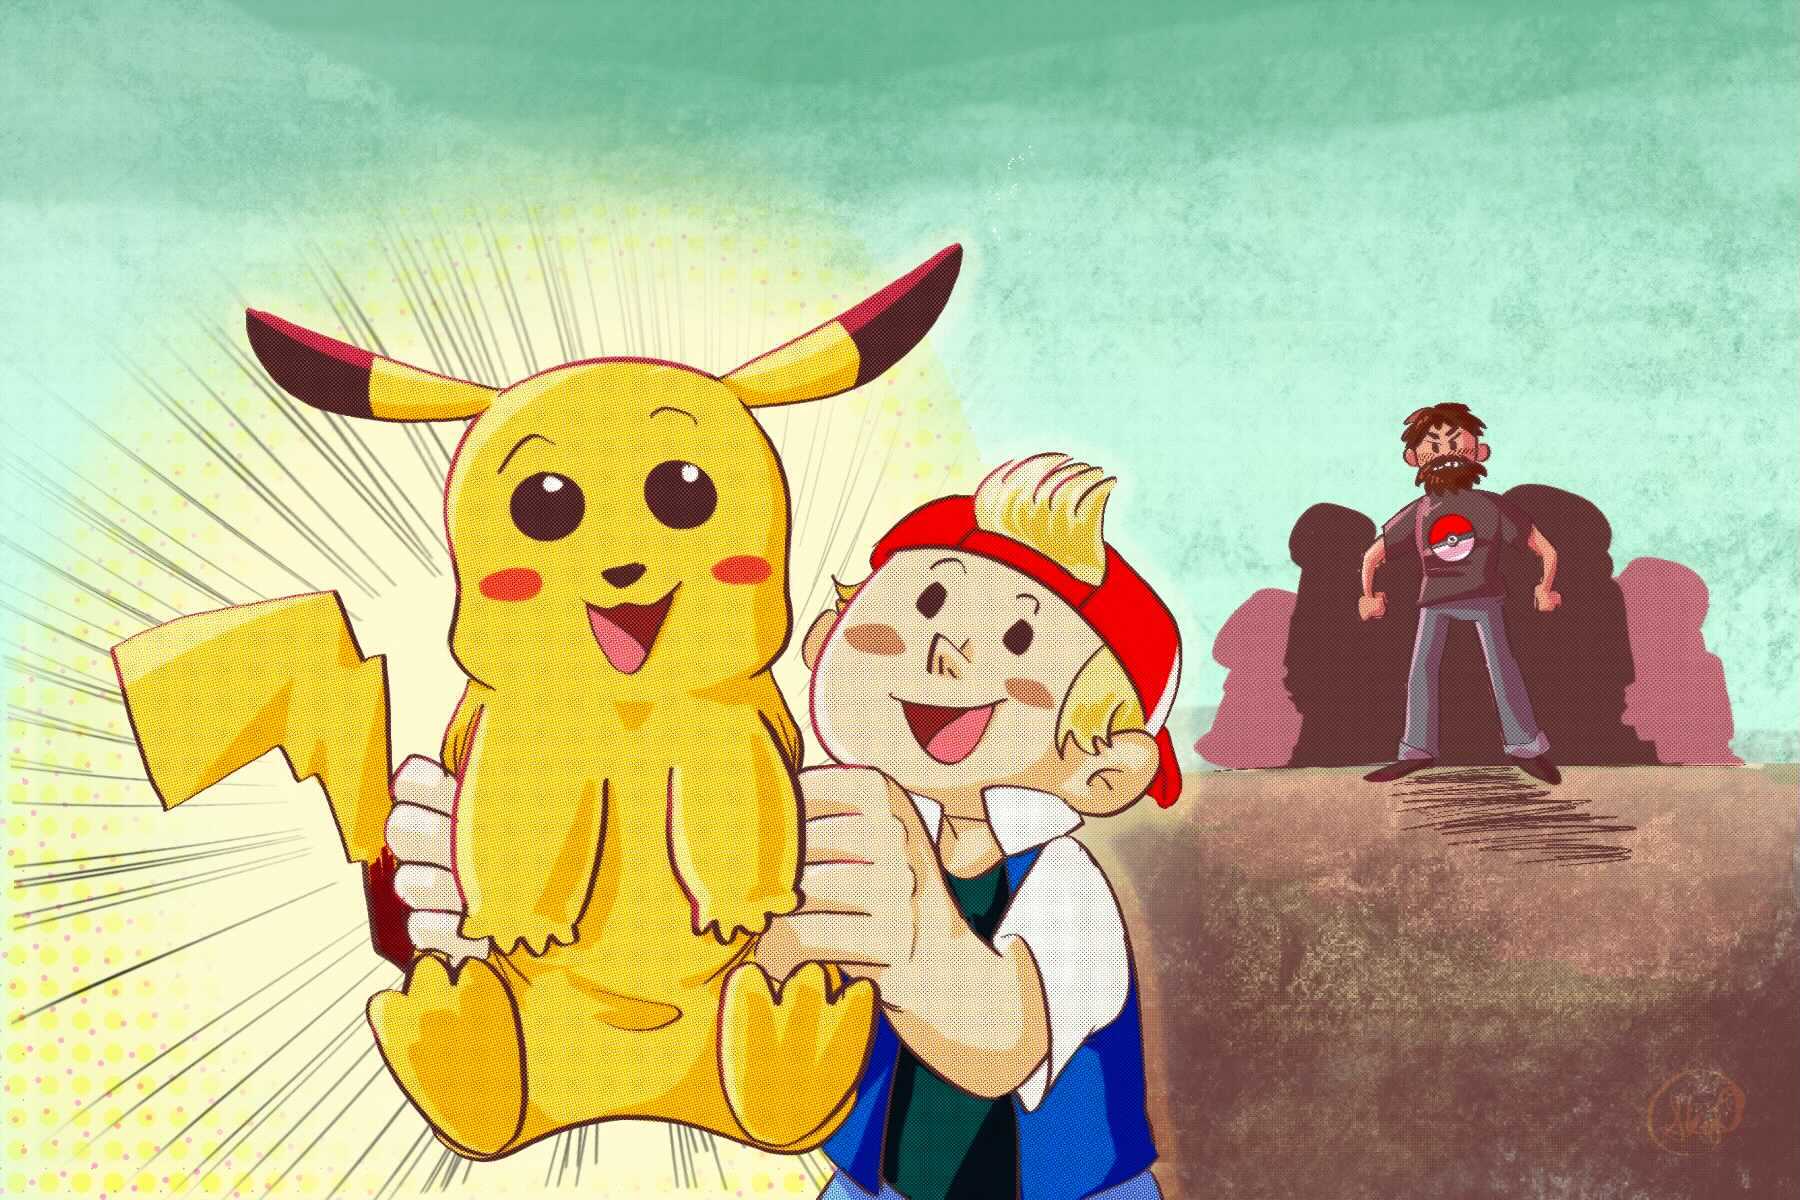 Pokemon trainer holding a Pikachu with angry fan in the background